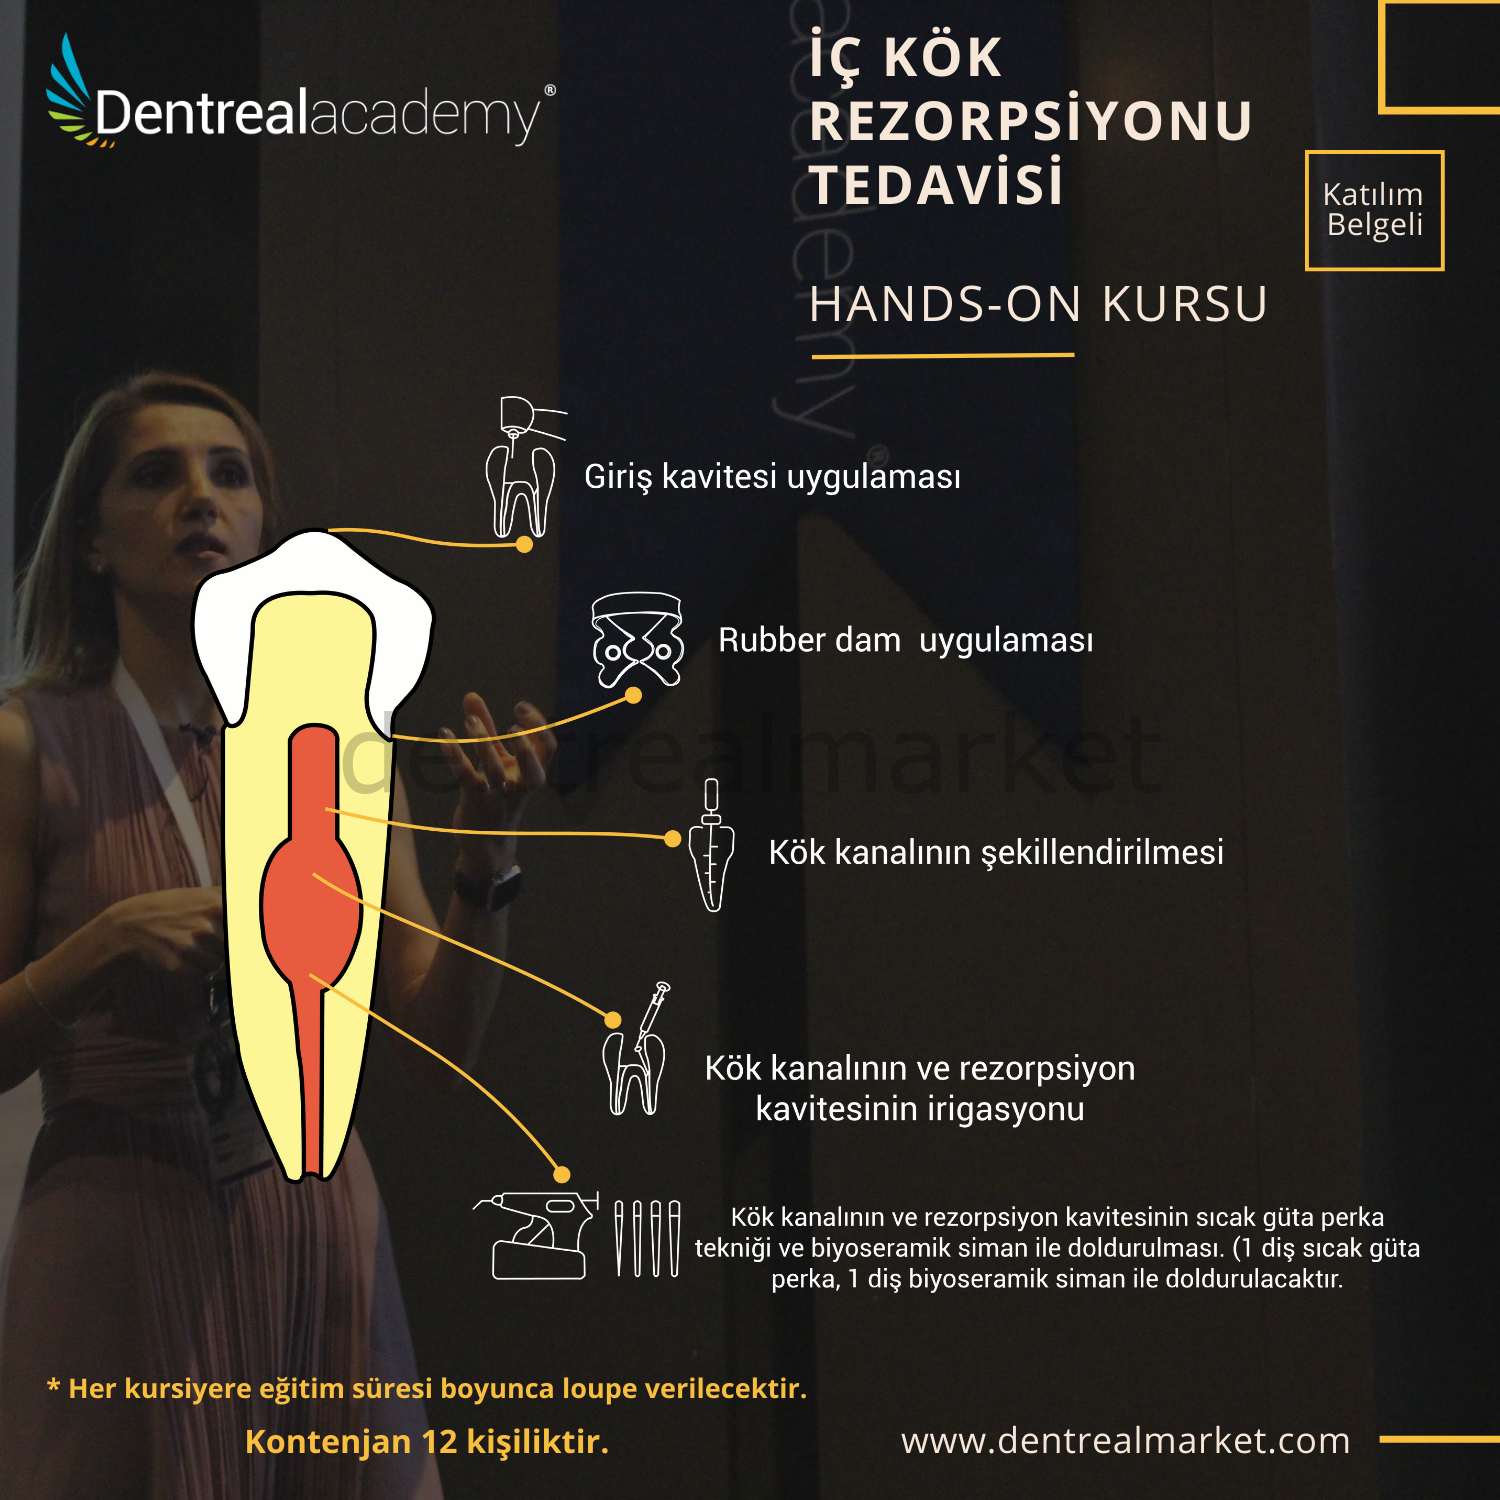 DentrealStore - Dentrealacademy Inner Root Resorption Treatment Hands-On Course